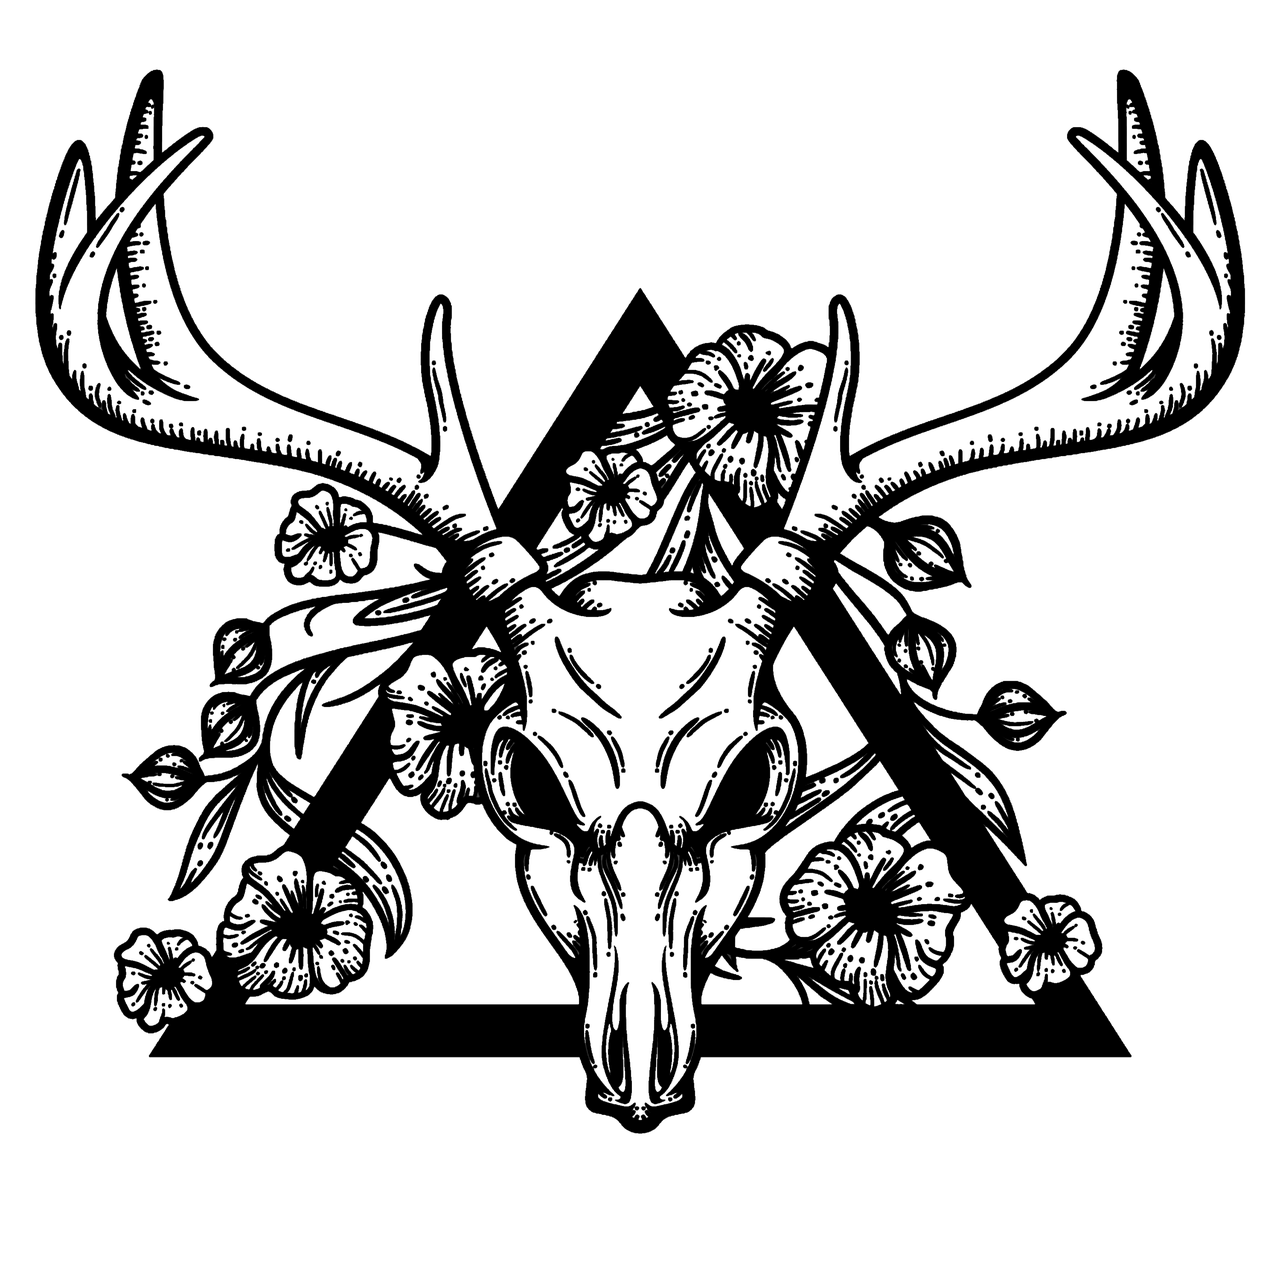 a black and white drawing of a deer's head, lineart, by Andrei Kolkoutine, skull design for a rock band, amoled wallpaper, dark flowers, dark ambient album cover